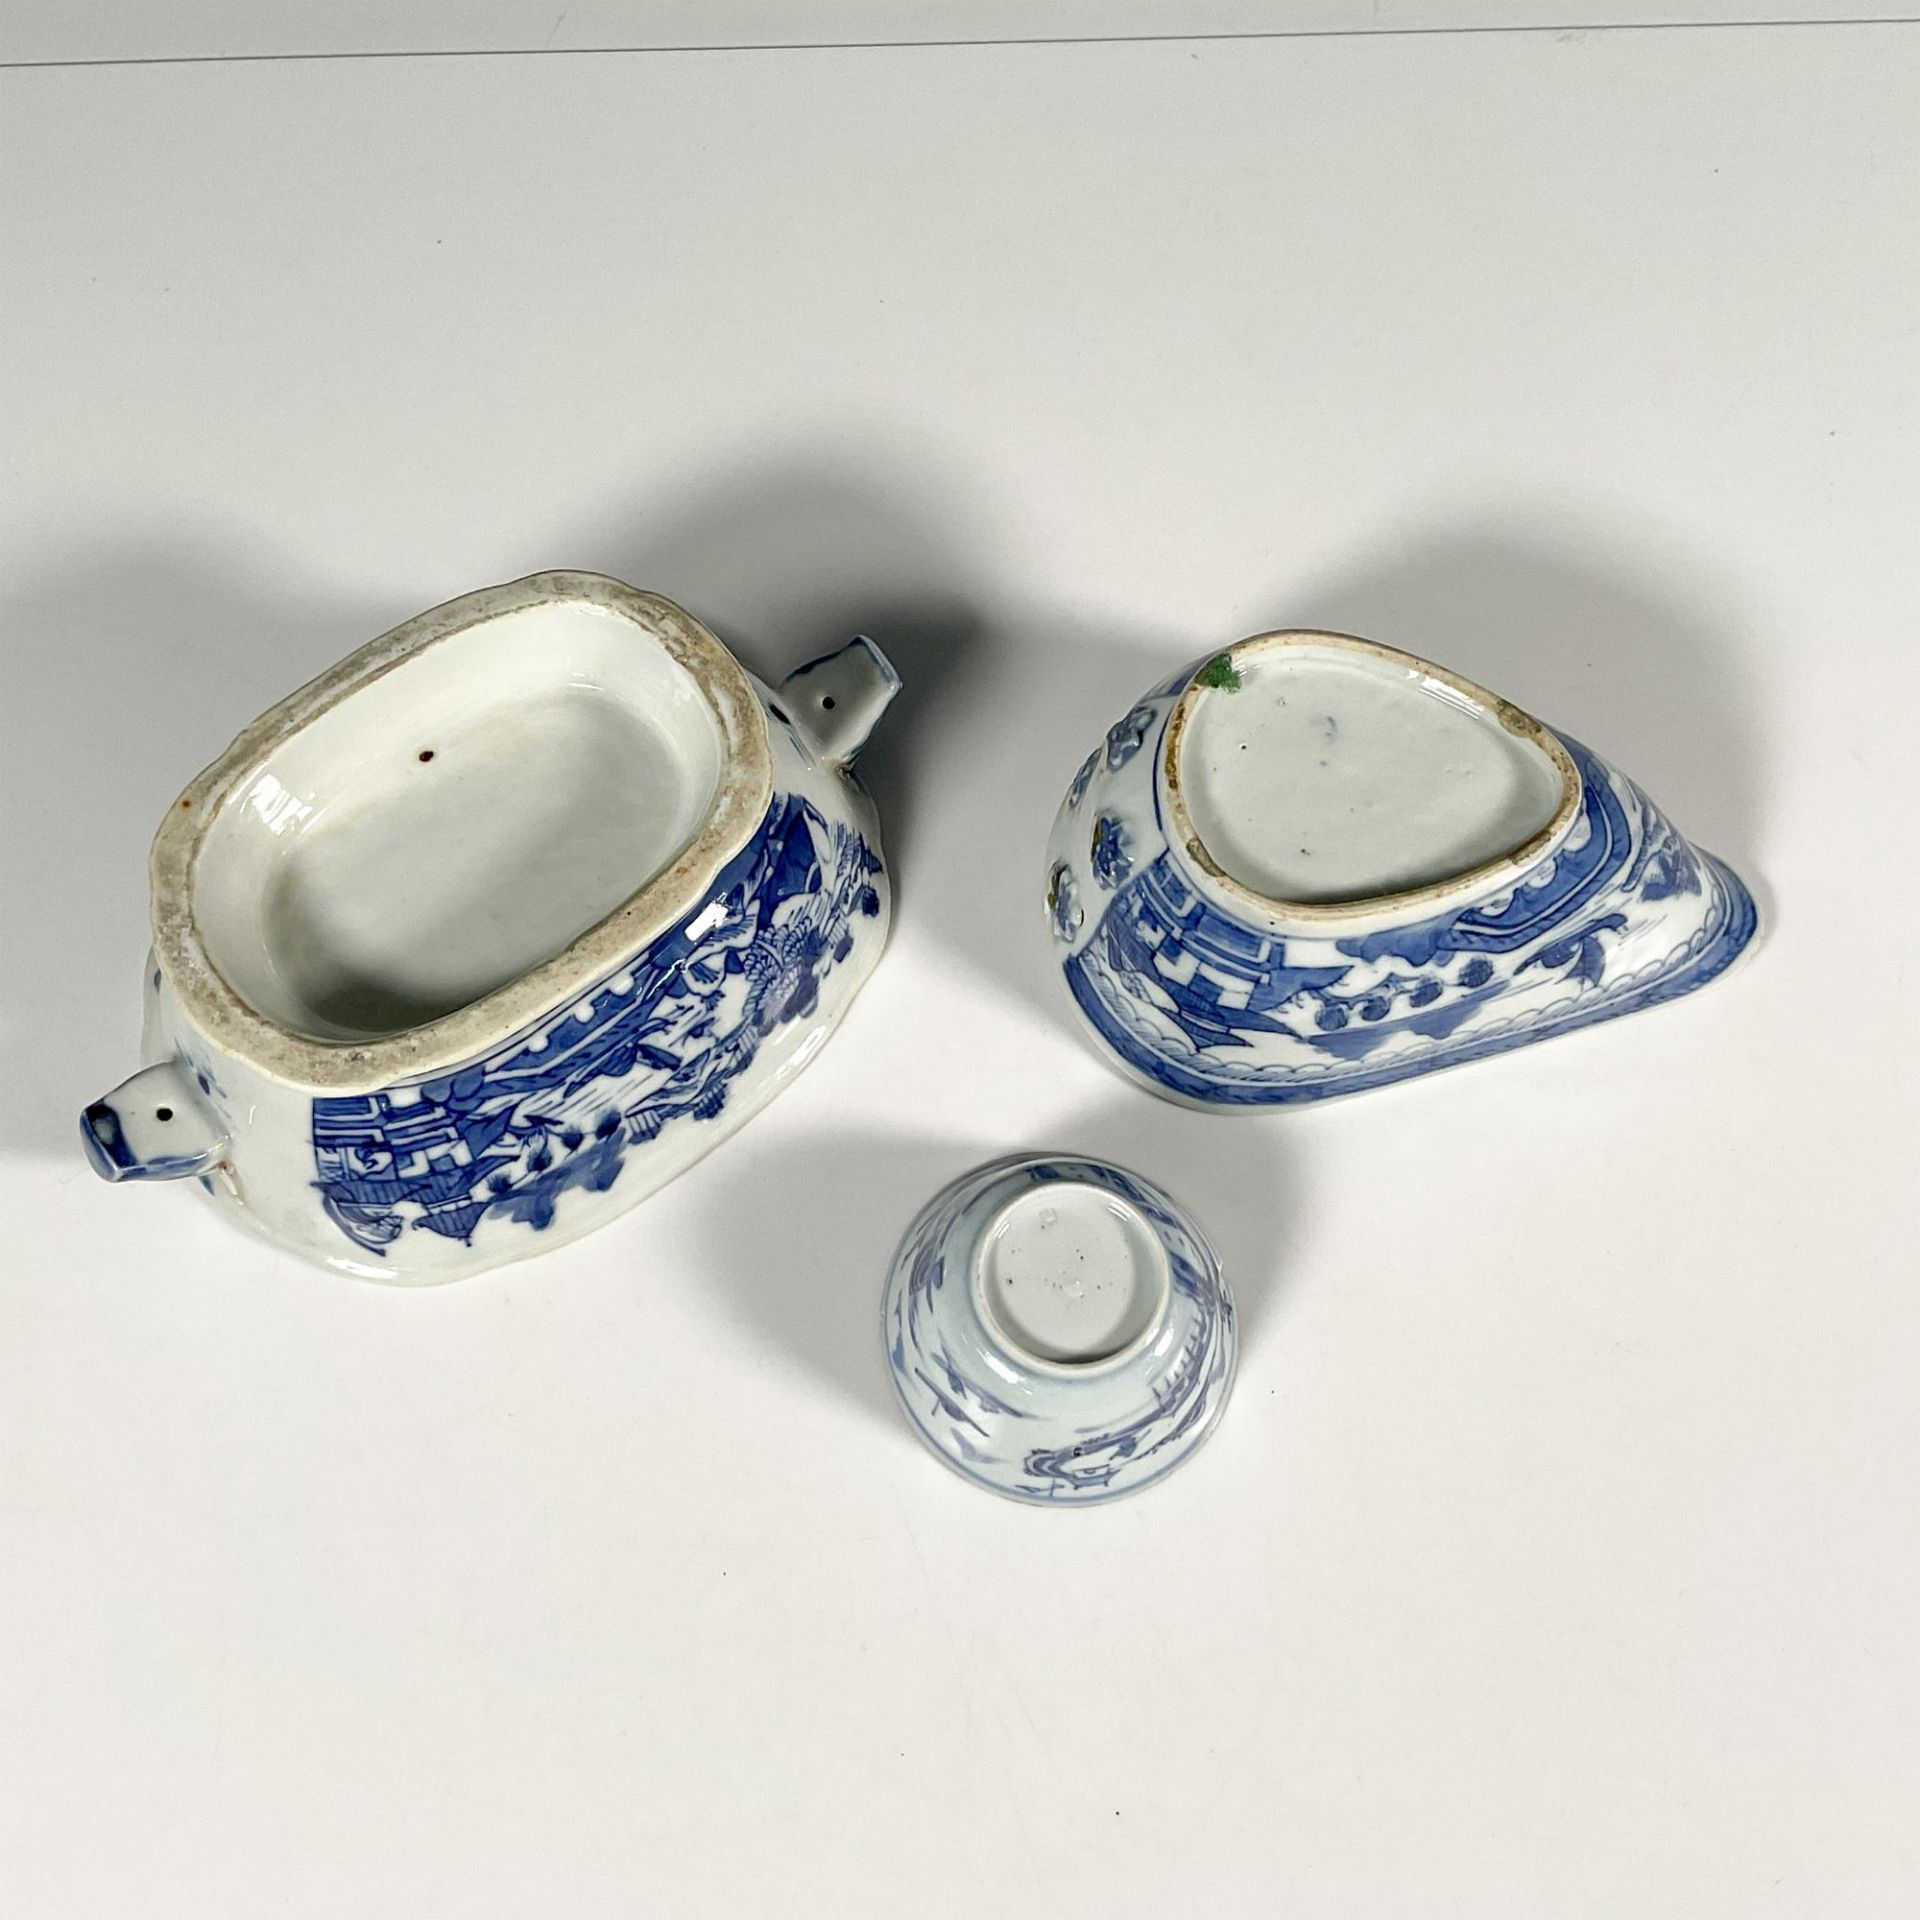 3pc Antique Chinese Blue and White Porcelain Dishware - Image 5 of 5